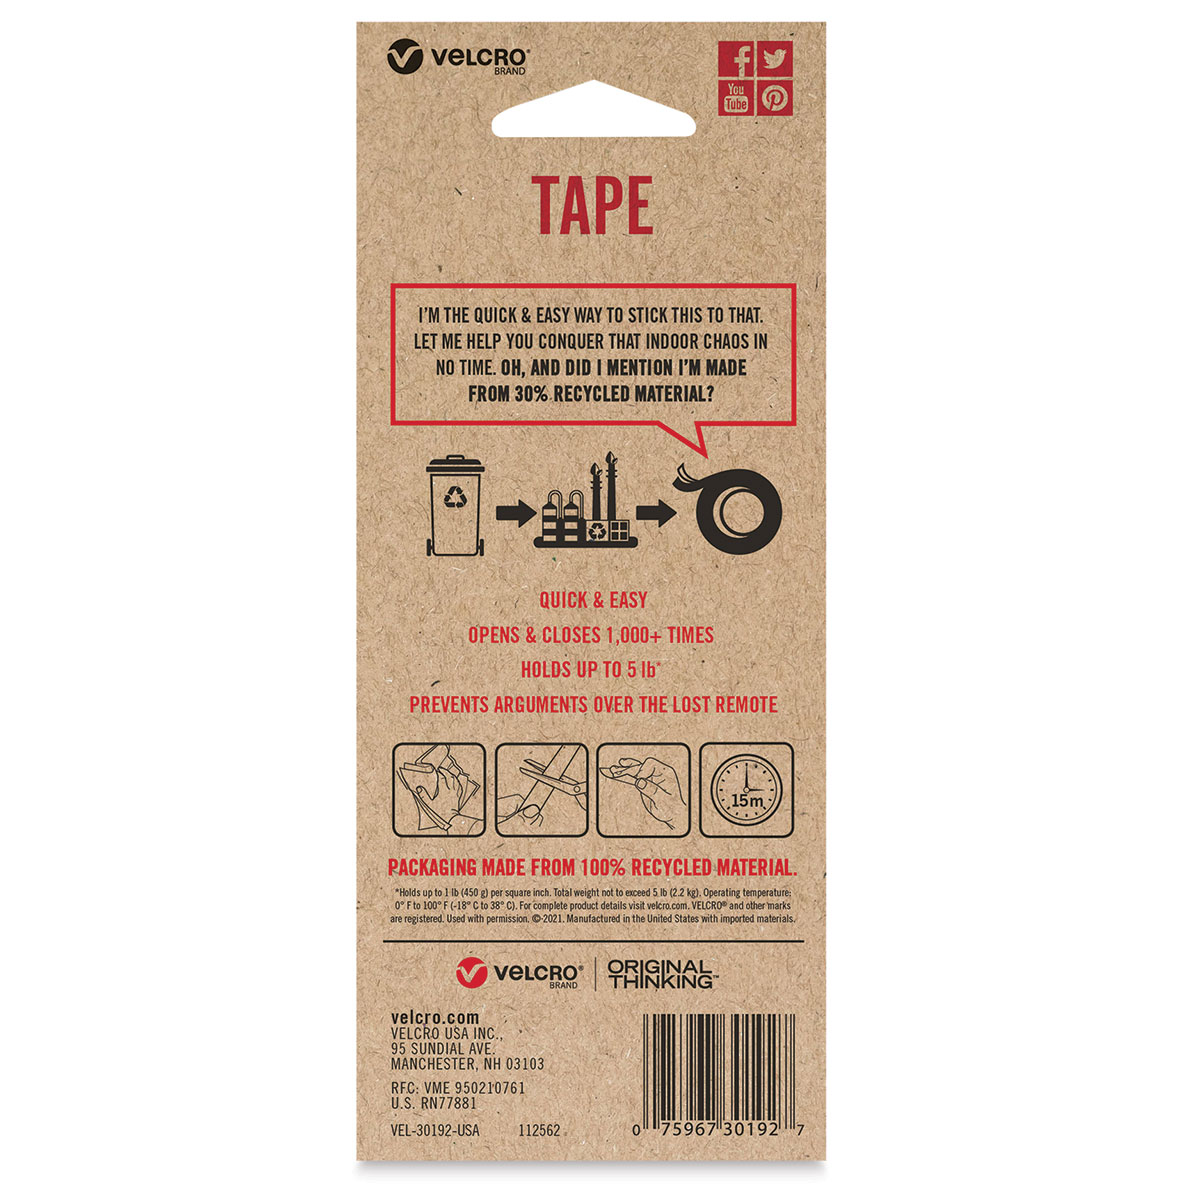 Velcro Brand ECO Collection Tape